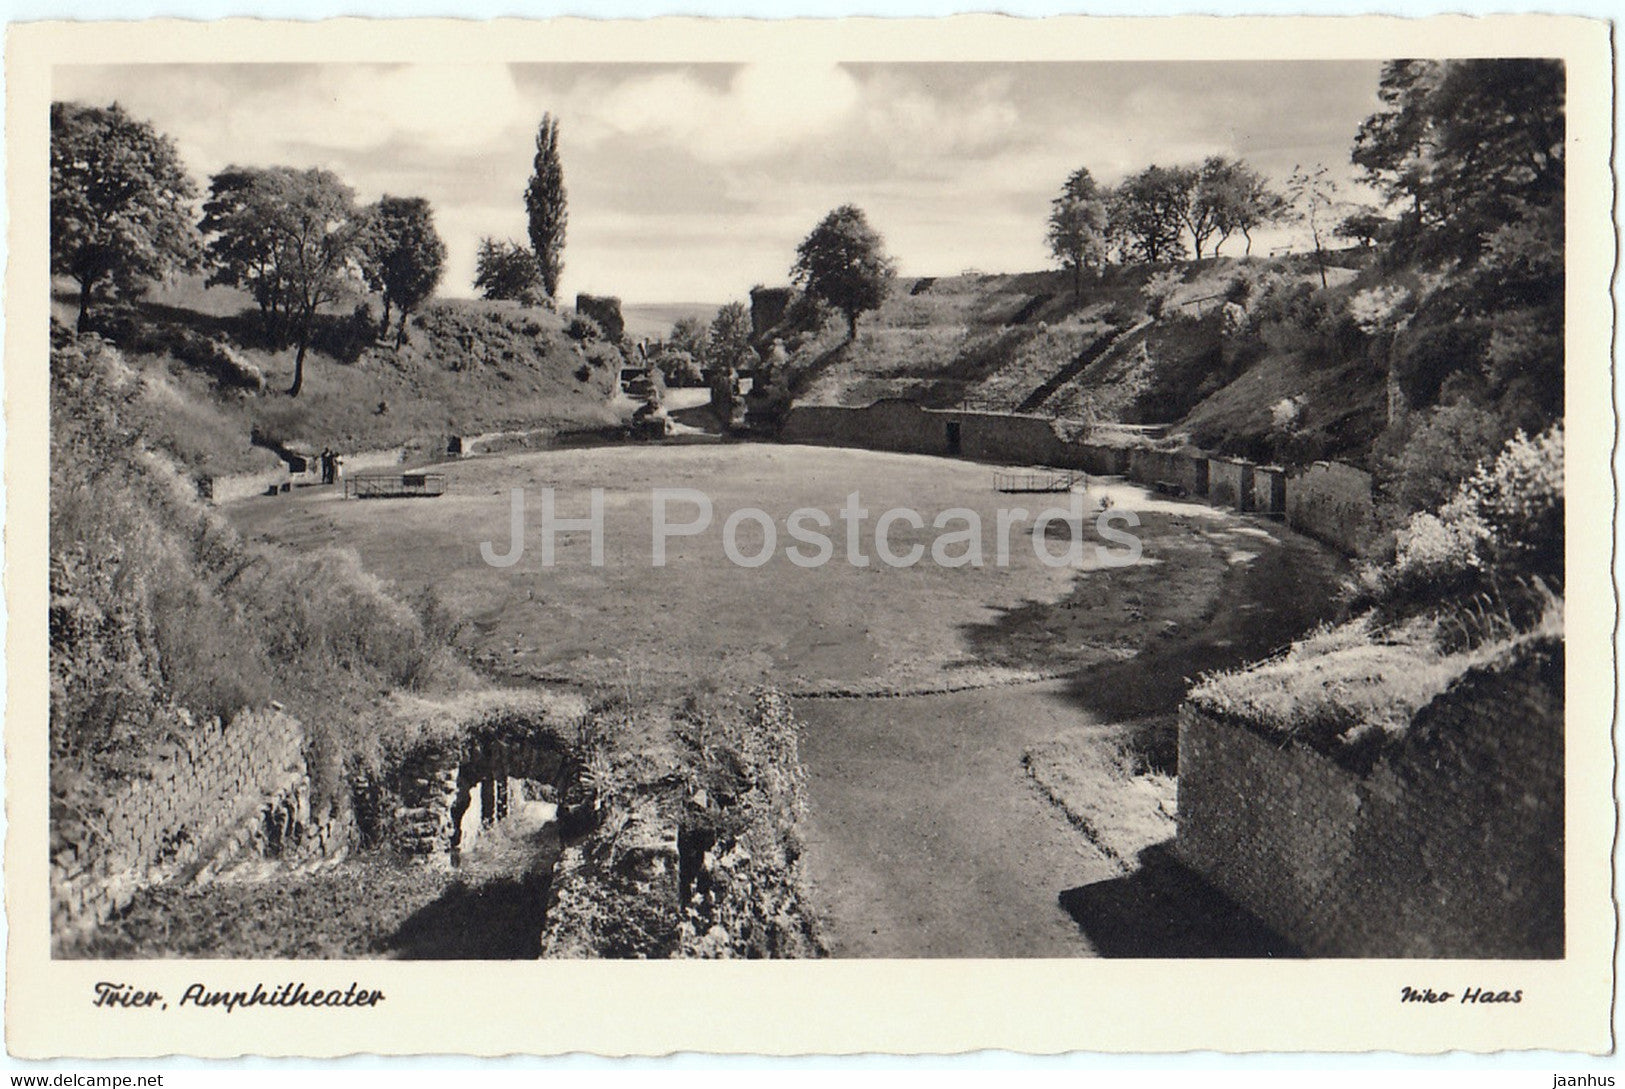 Trier - Amphitheater - ancient theatre - T 810 - Germany - unused - JH Postcards